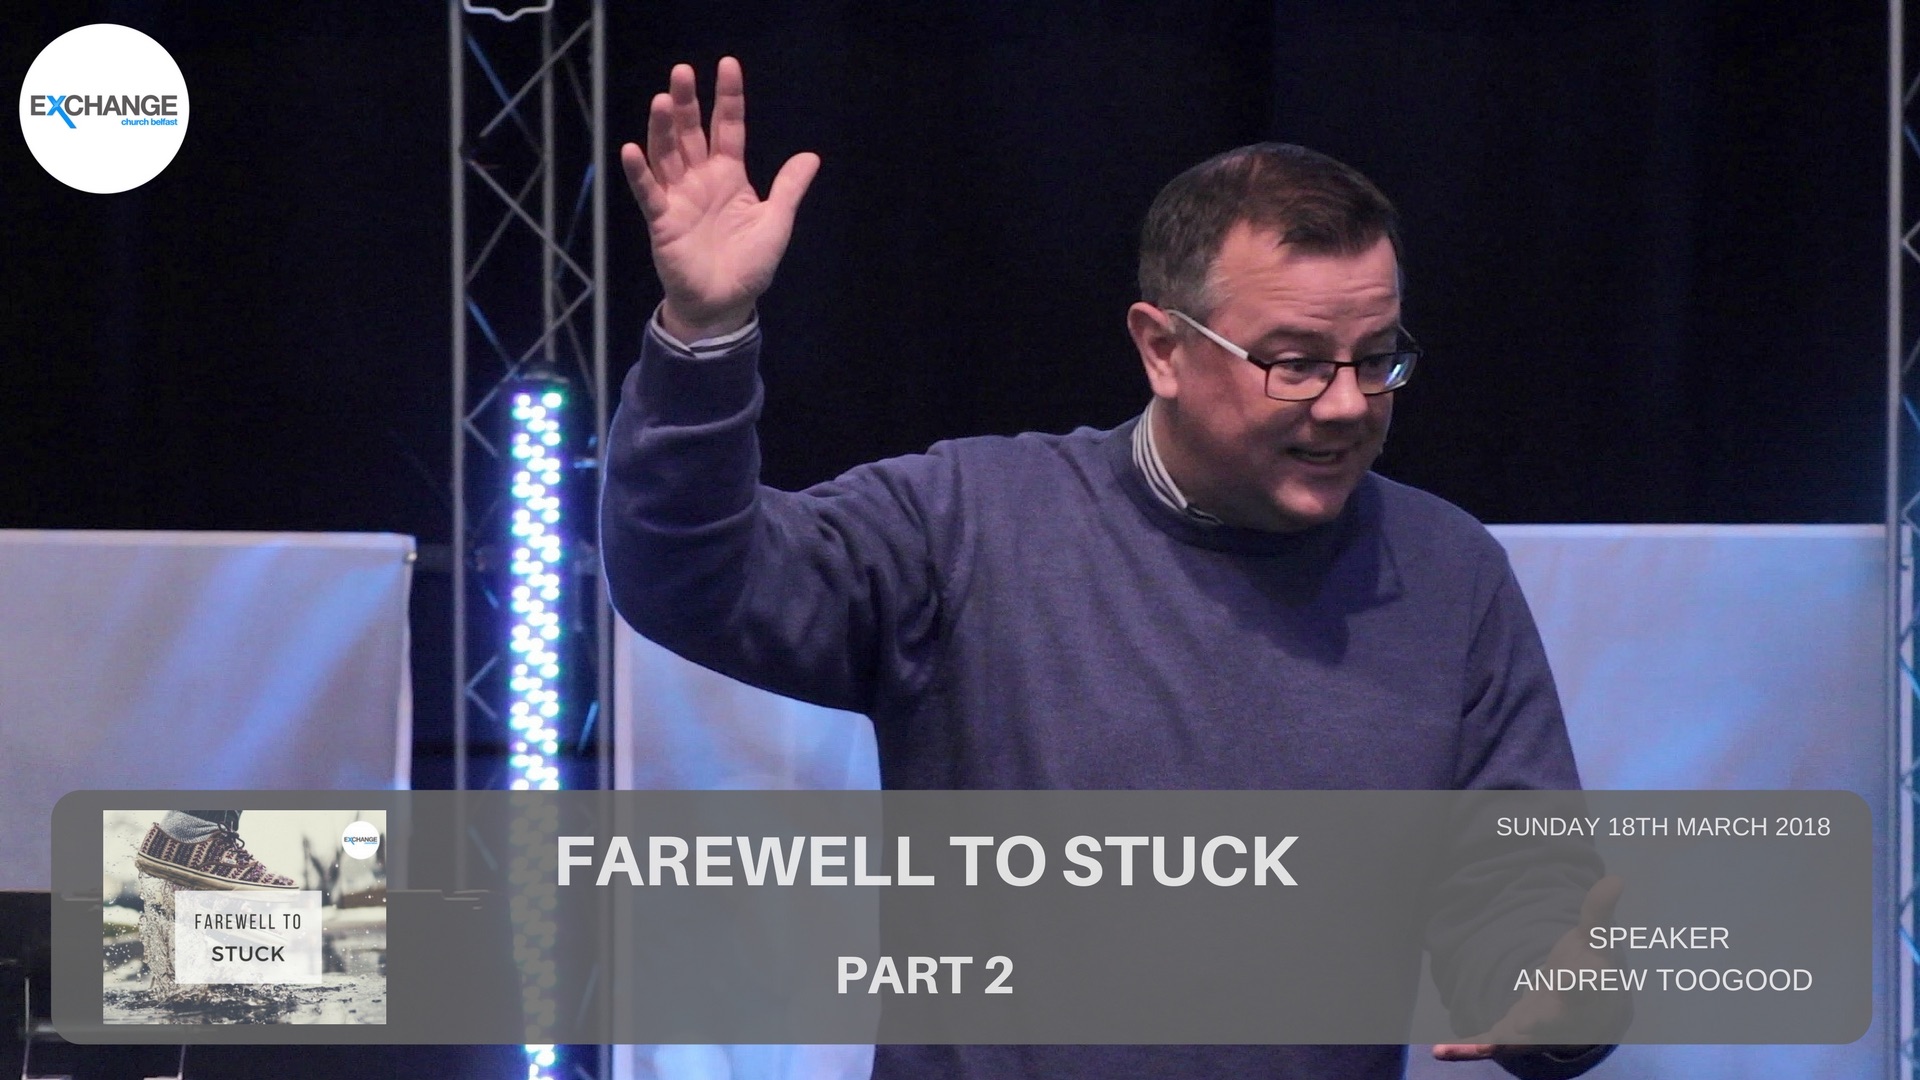 Farewell to Stuck - Part 2 - But they sin!